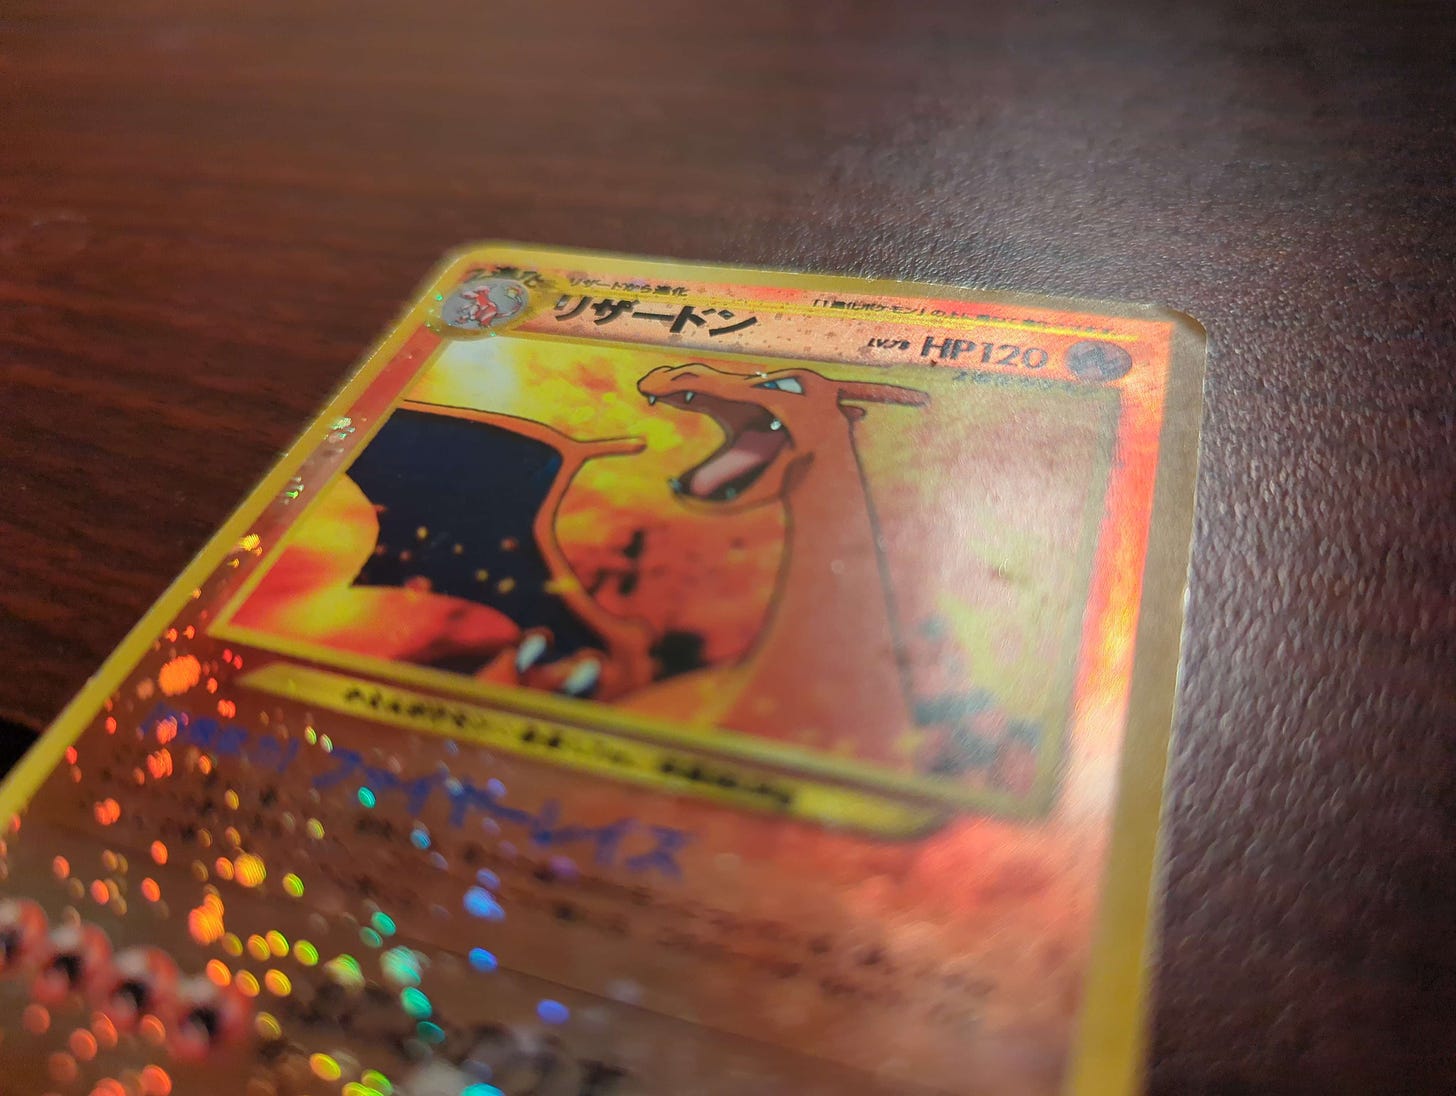 A close-up shot of Aiden’s cherished Charizard card